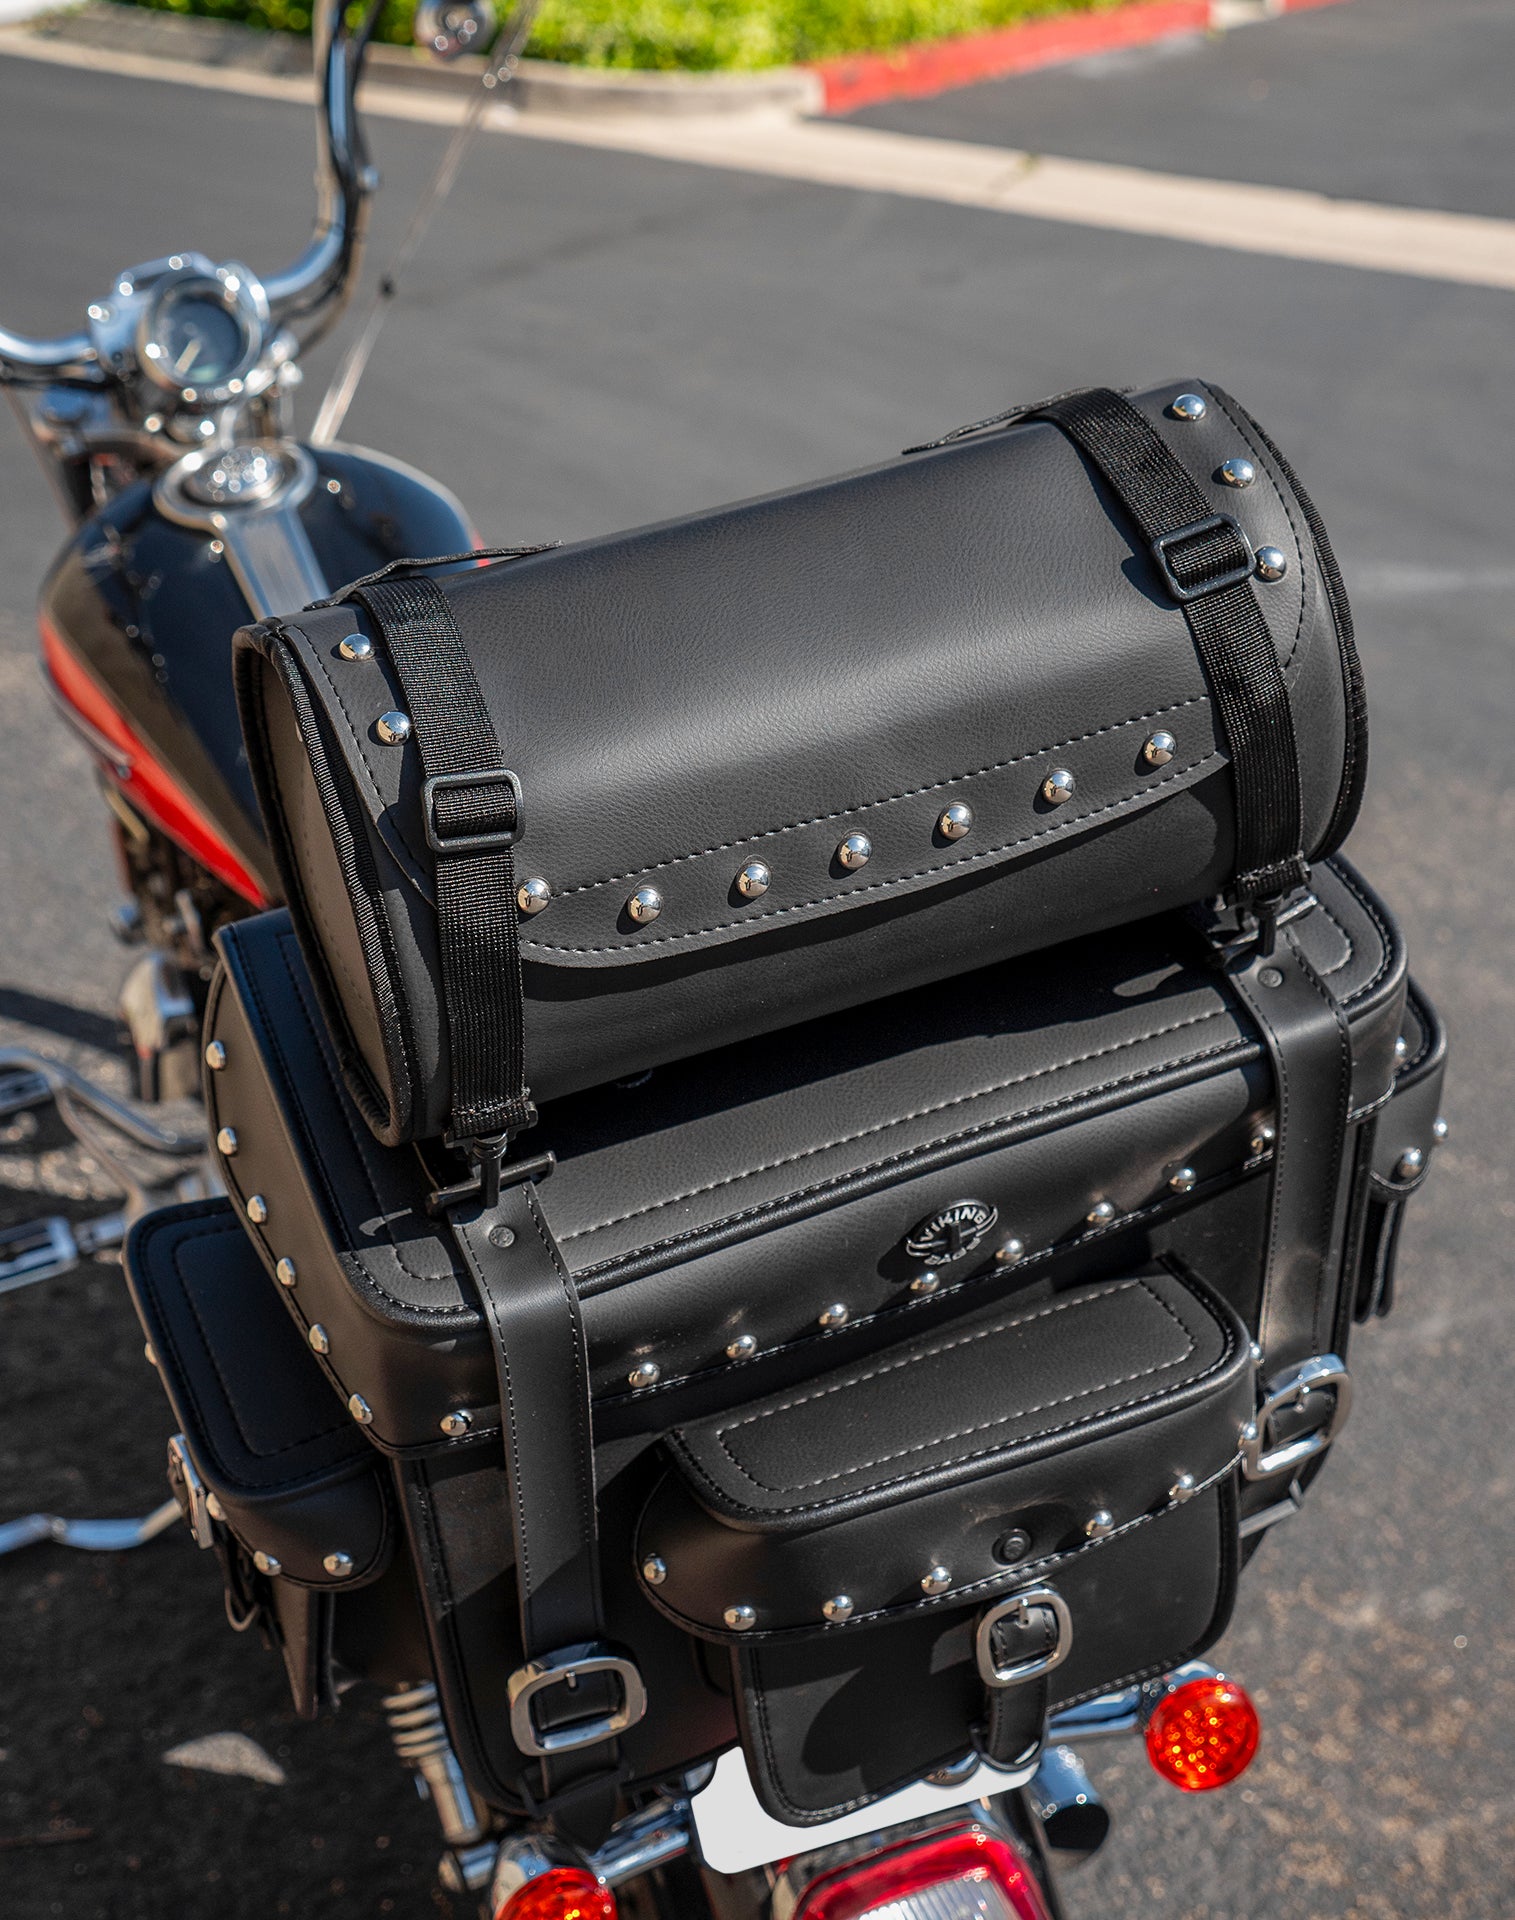 35L - Revival Series XL Yamaha Studded Motorcycle Tail Bag Lifestyle